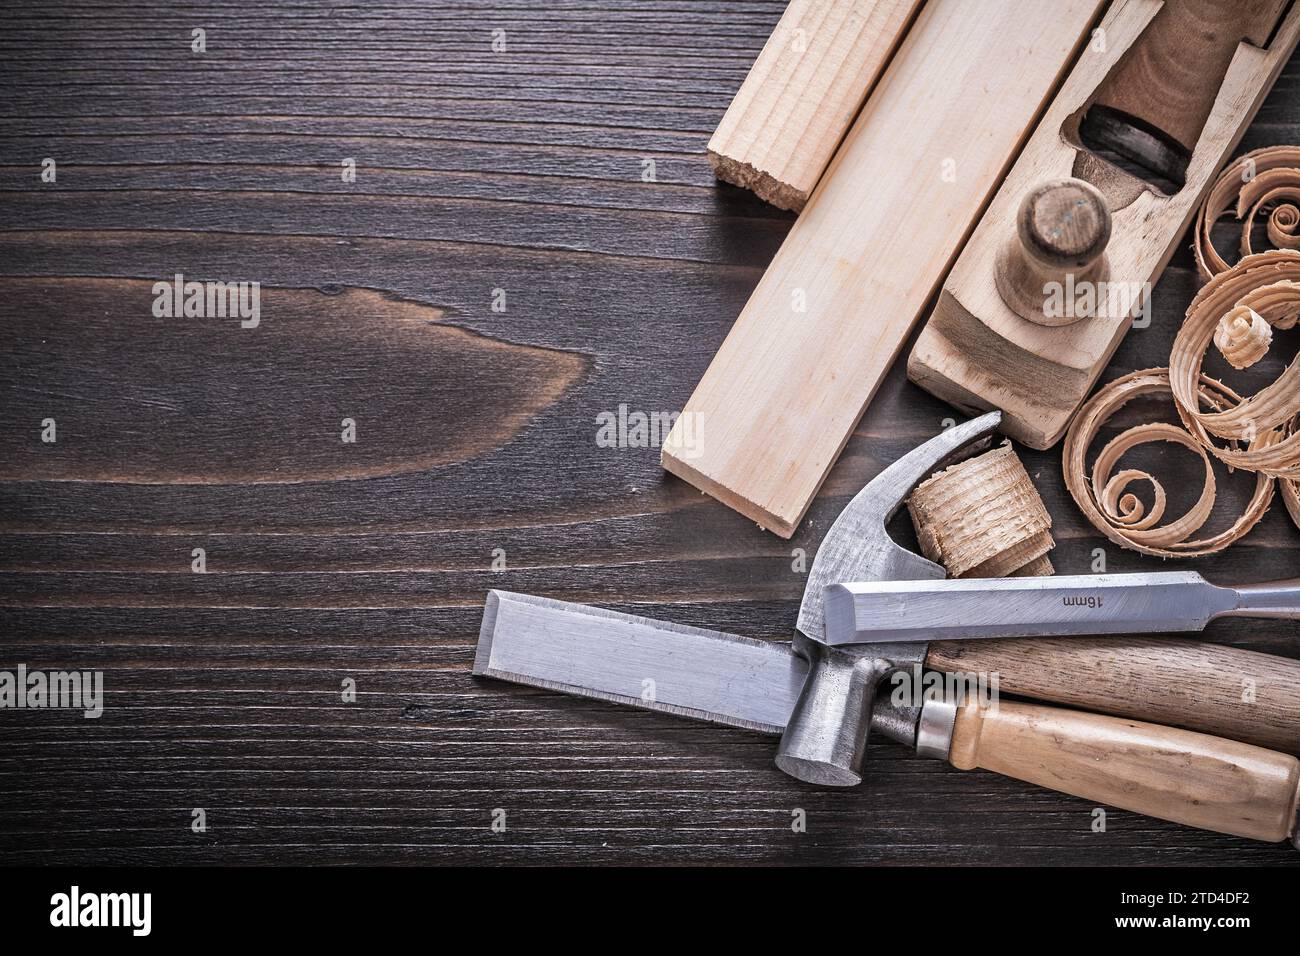 Planner claw hammer metal chisel wooden bolt and curled shavings on vintage wooden board building concept Stock Photo